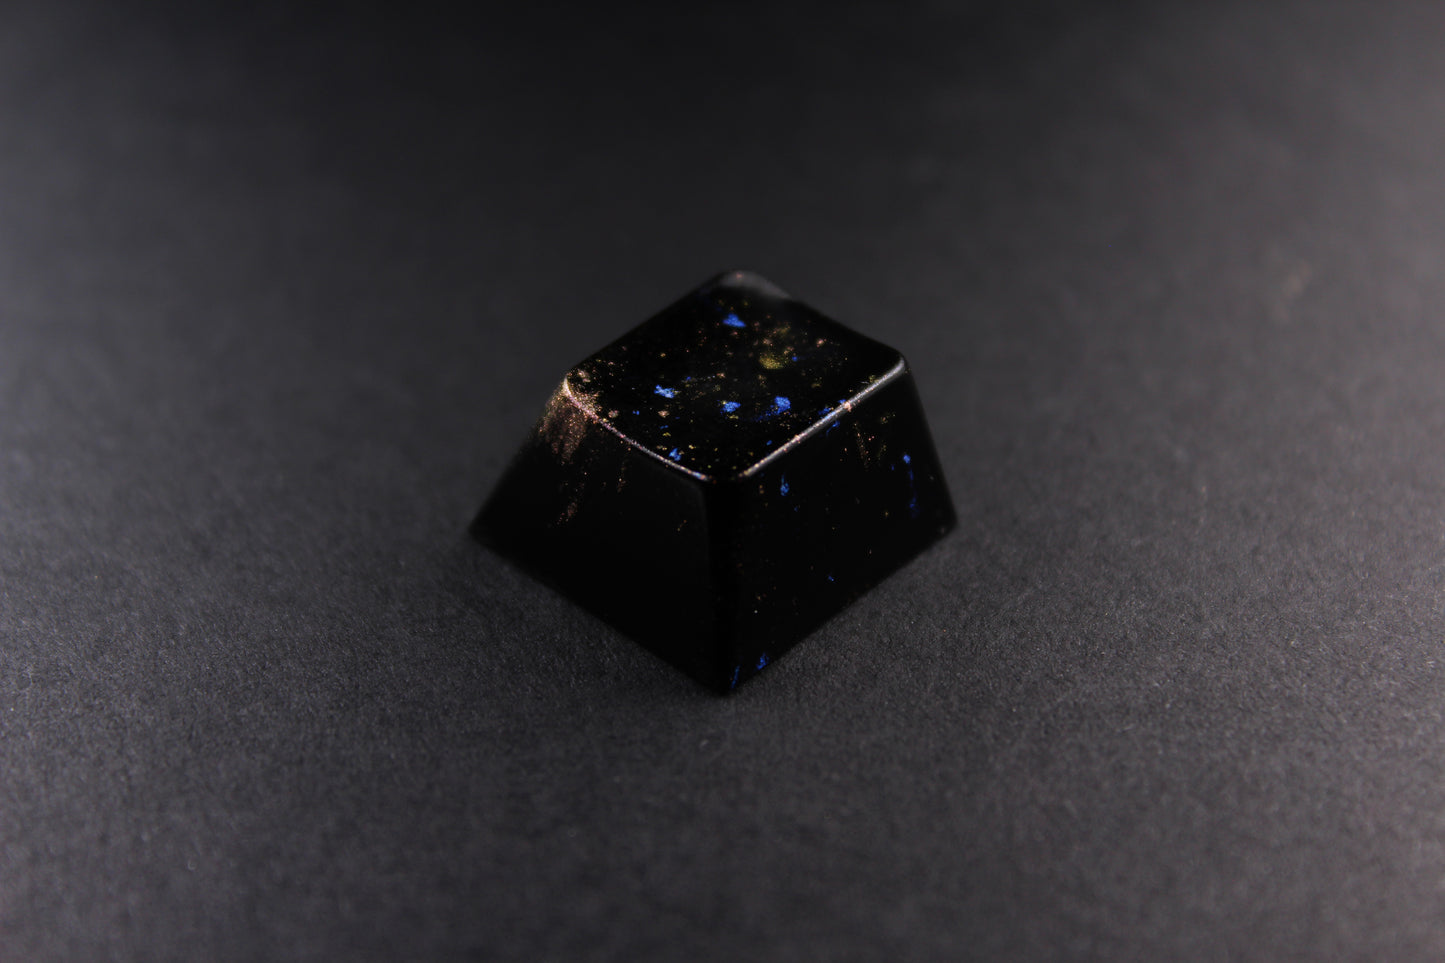 Cherry Esc - The void - PrimeCaps Keycap - Blank and Sculpted Artisan Keycaps for cherry MX mechanical keyboards 